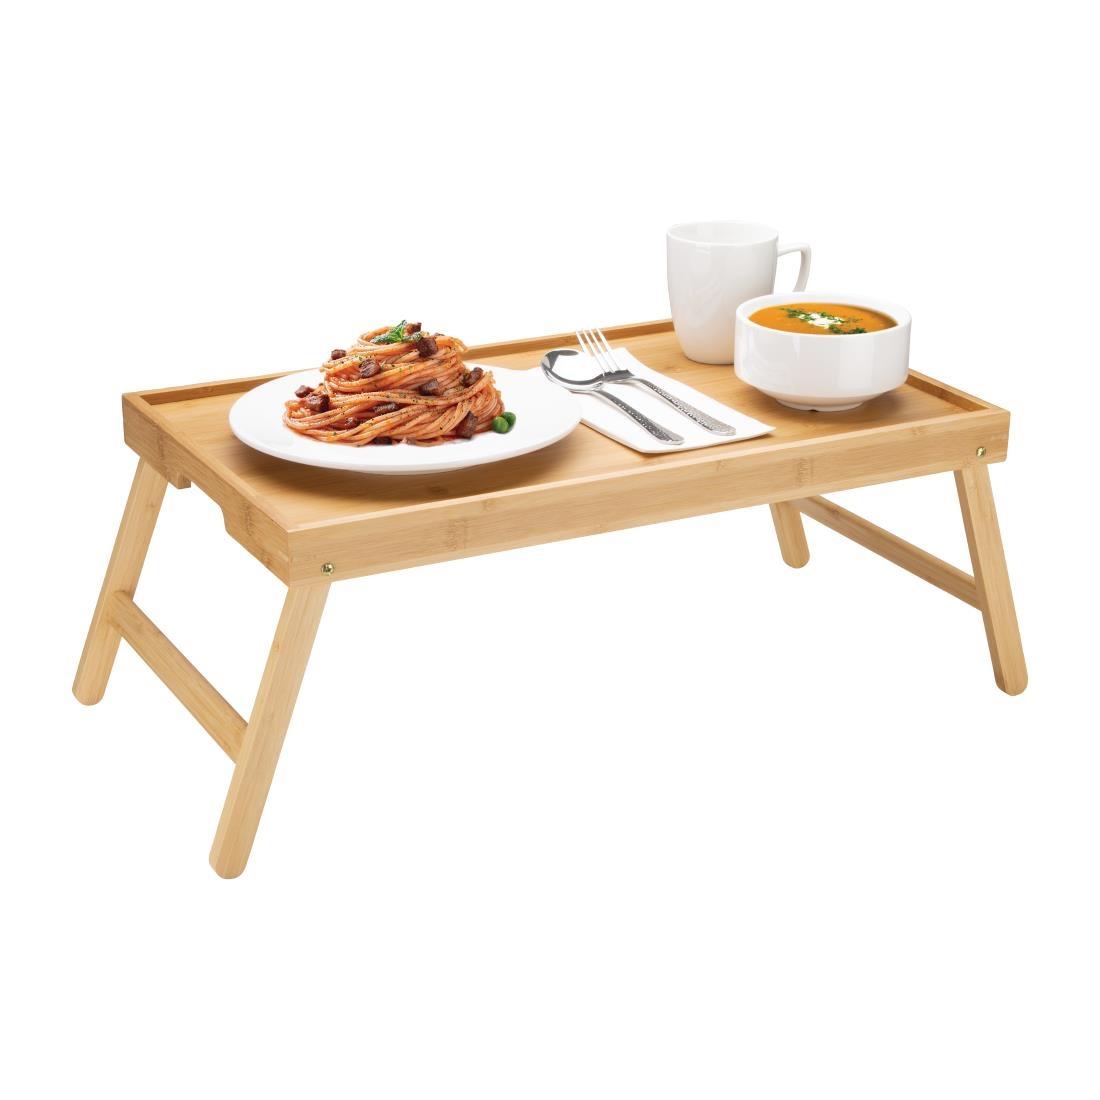 Olympia Bamboo Room Service Tray 625x315x215mm - DT433  - 5